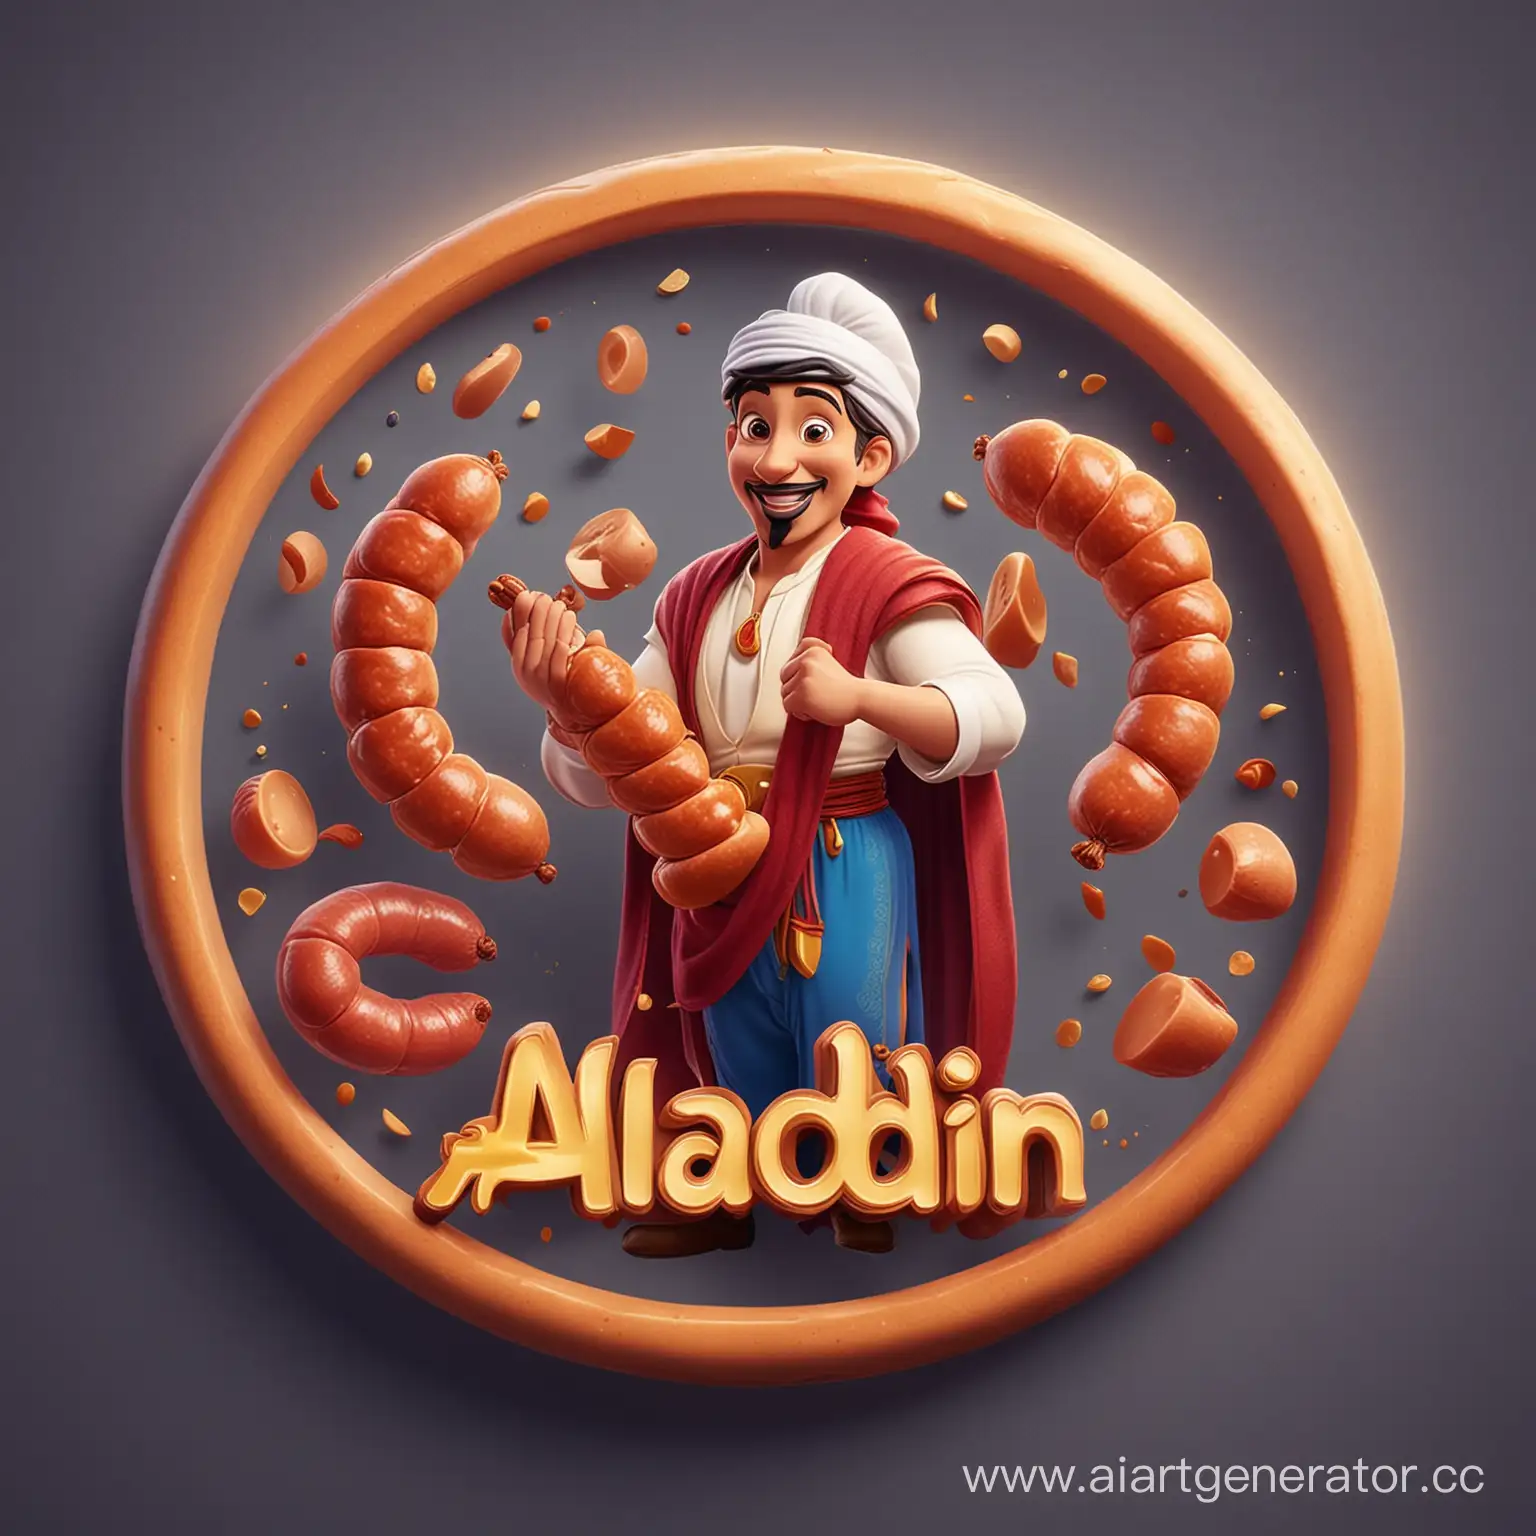 Aladdin-Character-Holding-Sausage-in-3D-Circle-Logo-with-Meat-and-Sausages-Light-Emitting-and-Optimistic